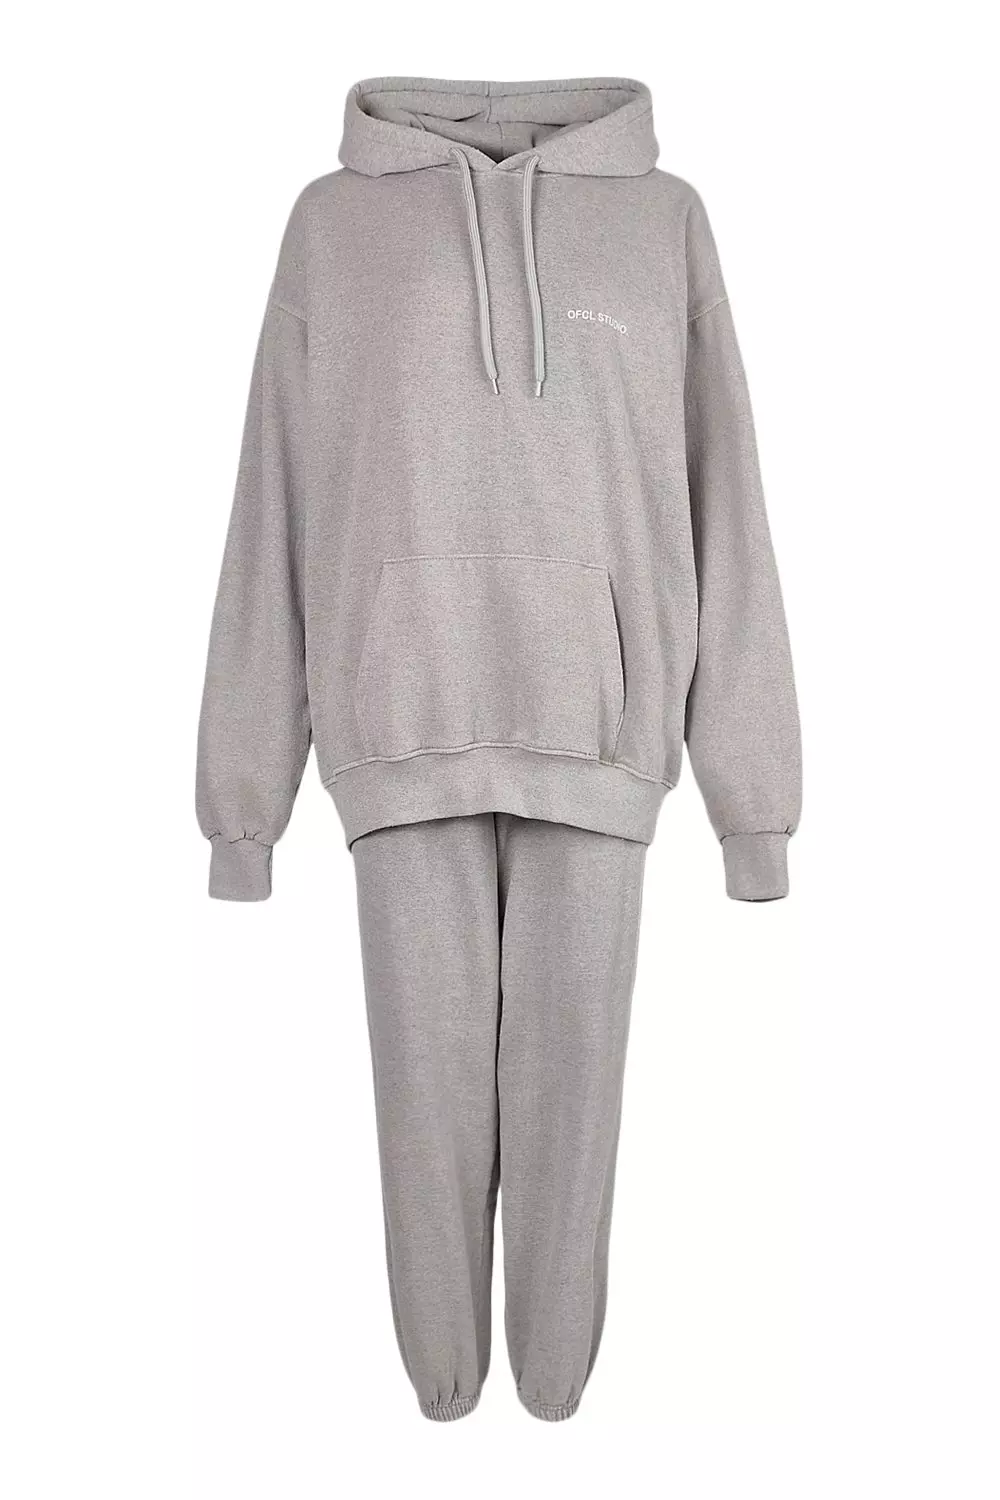 Size XLarge Gray All in Motion Under Clothes – OodlesCB